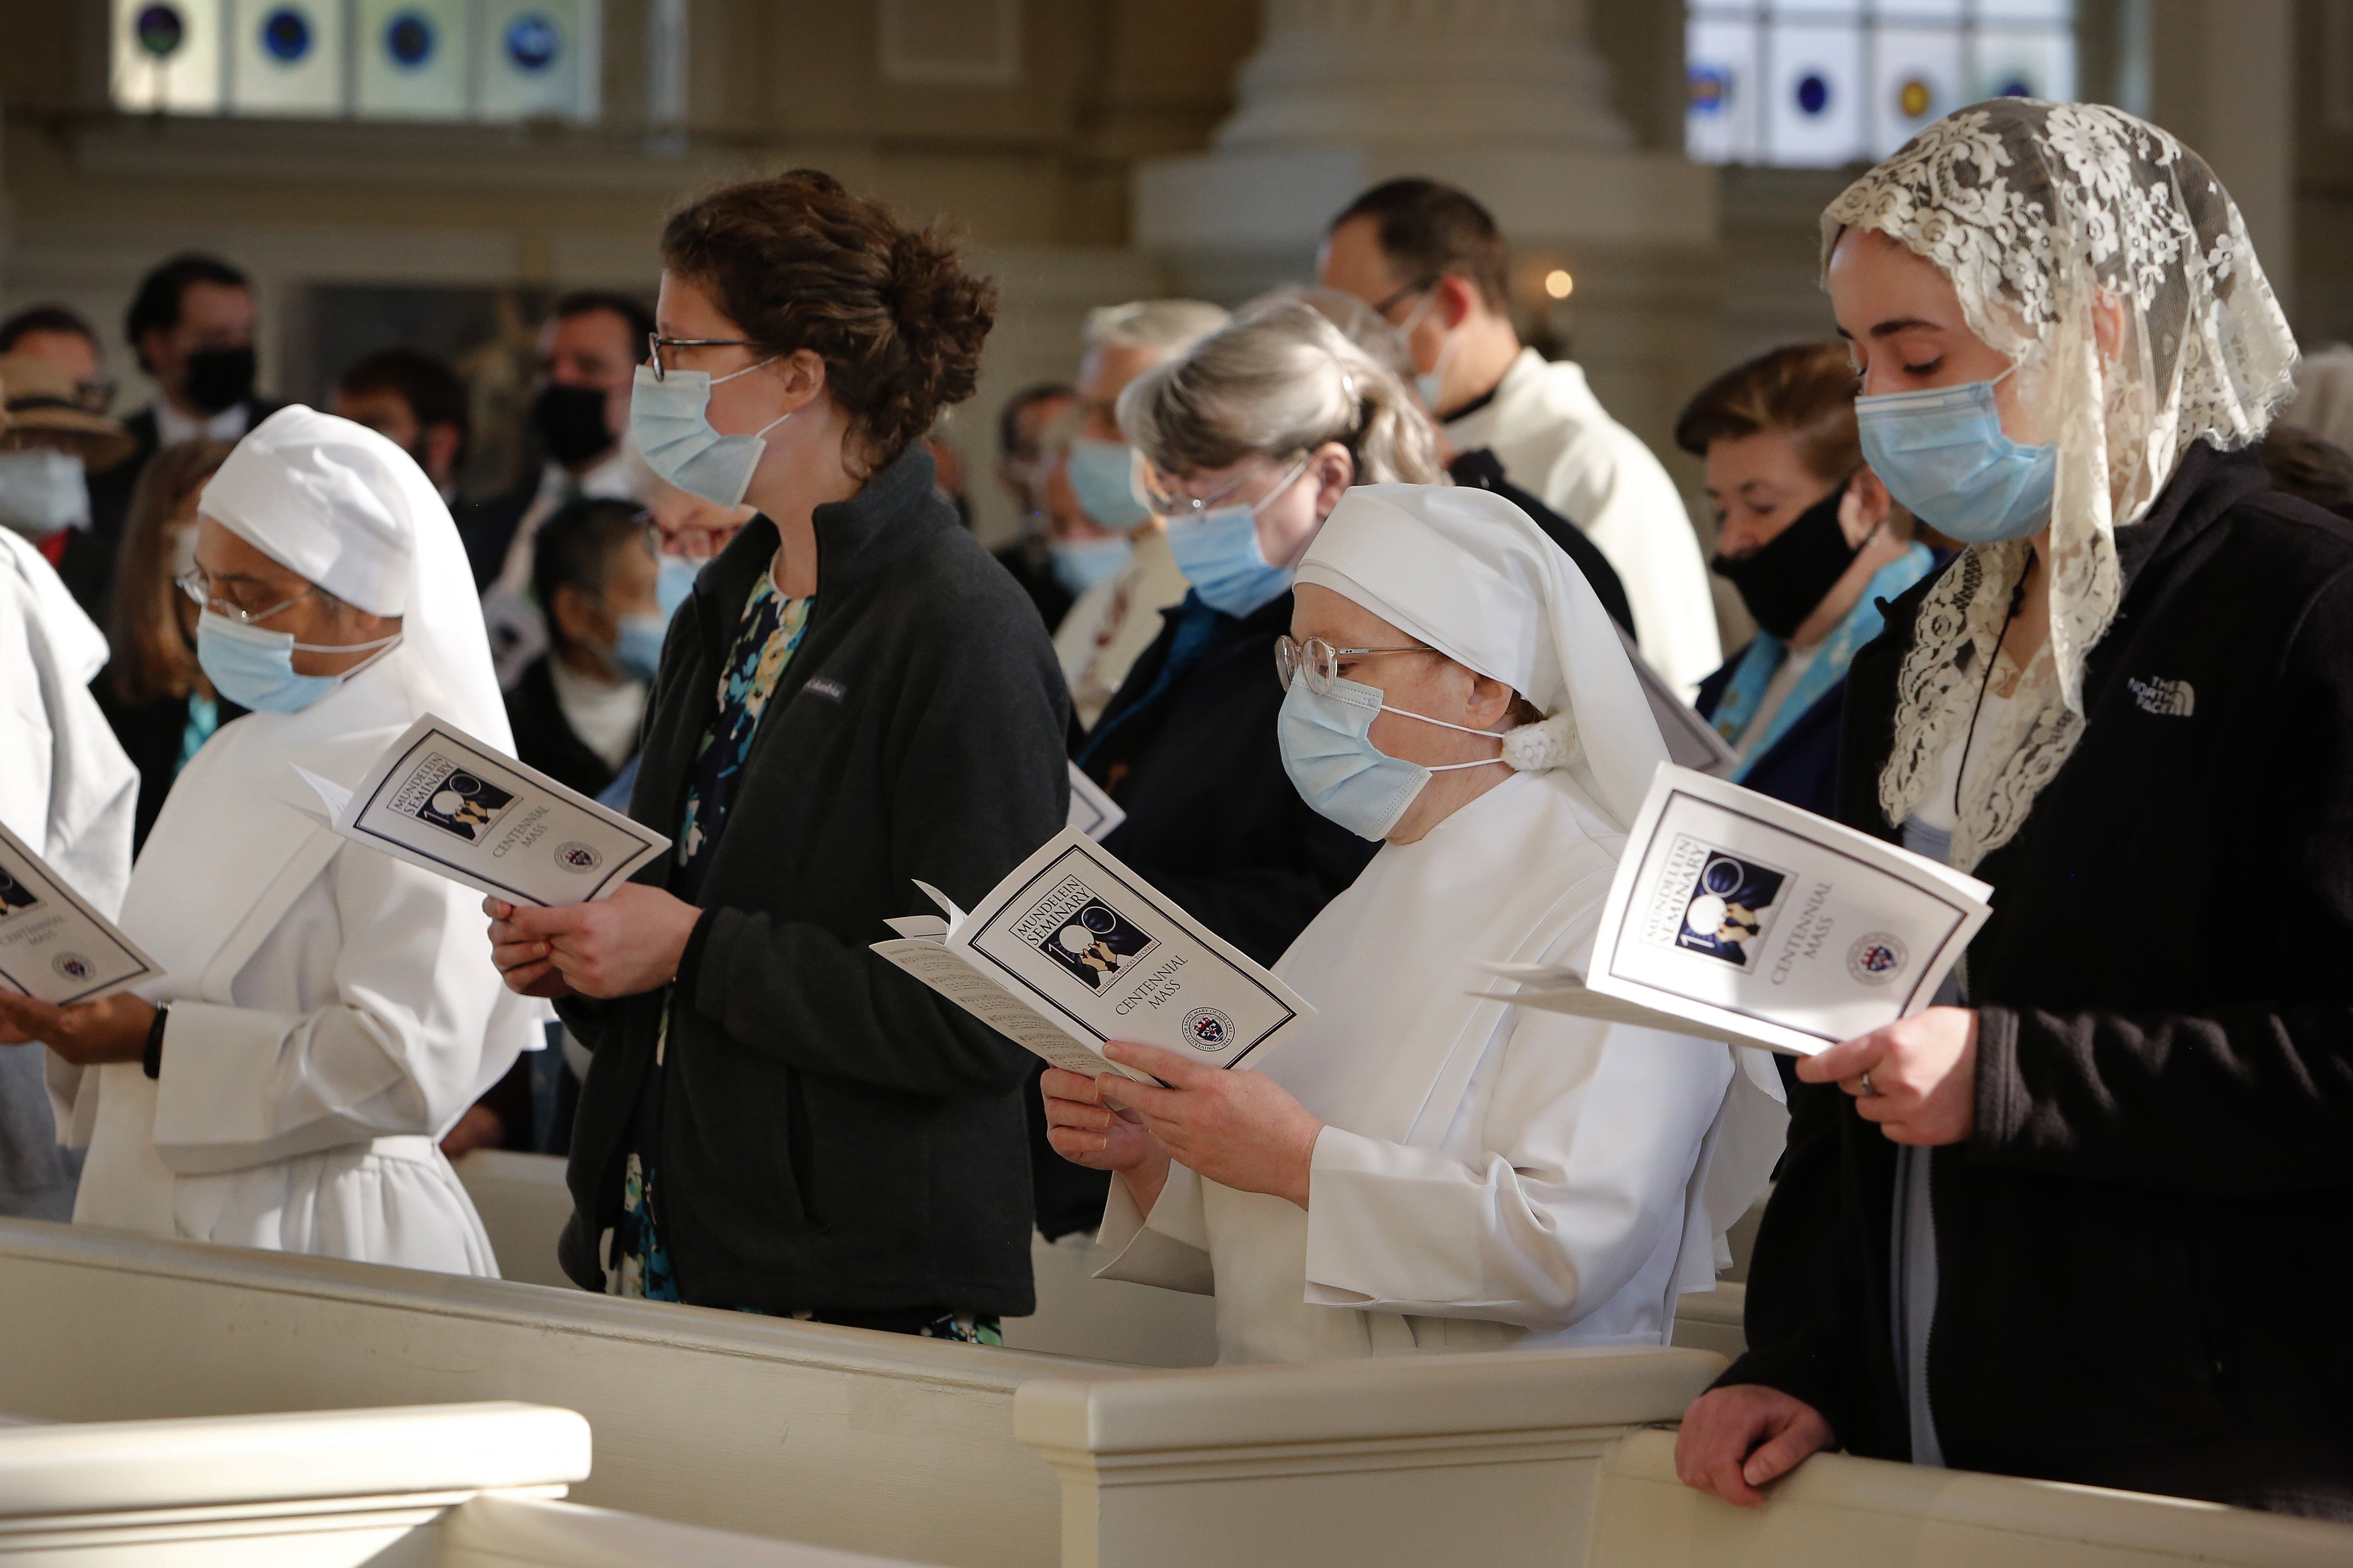 Guests including Little Sisters of the Poor sing during the entrance procession of Mass in the Chapel of the Immaculate Conception at Mundelein Seminary Oct. 17, 2021. (CNS photo/Karen Callaway, Chicago Catholic)